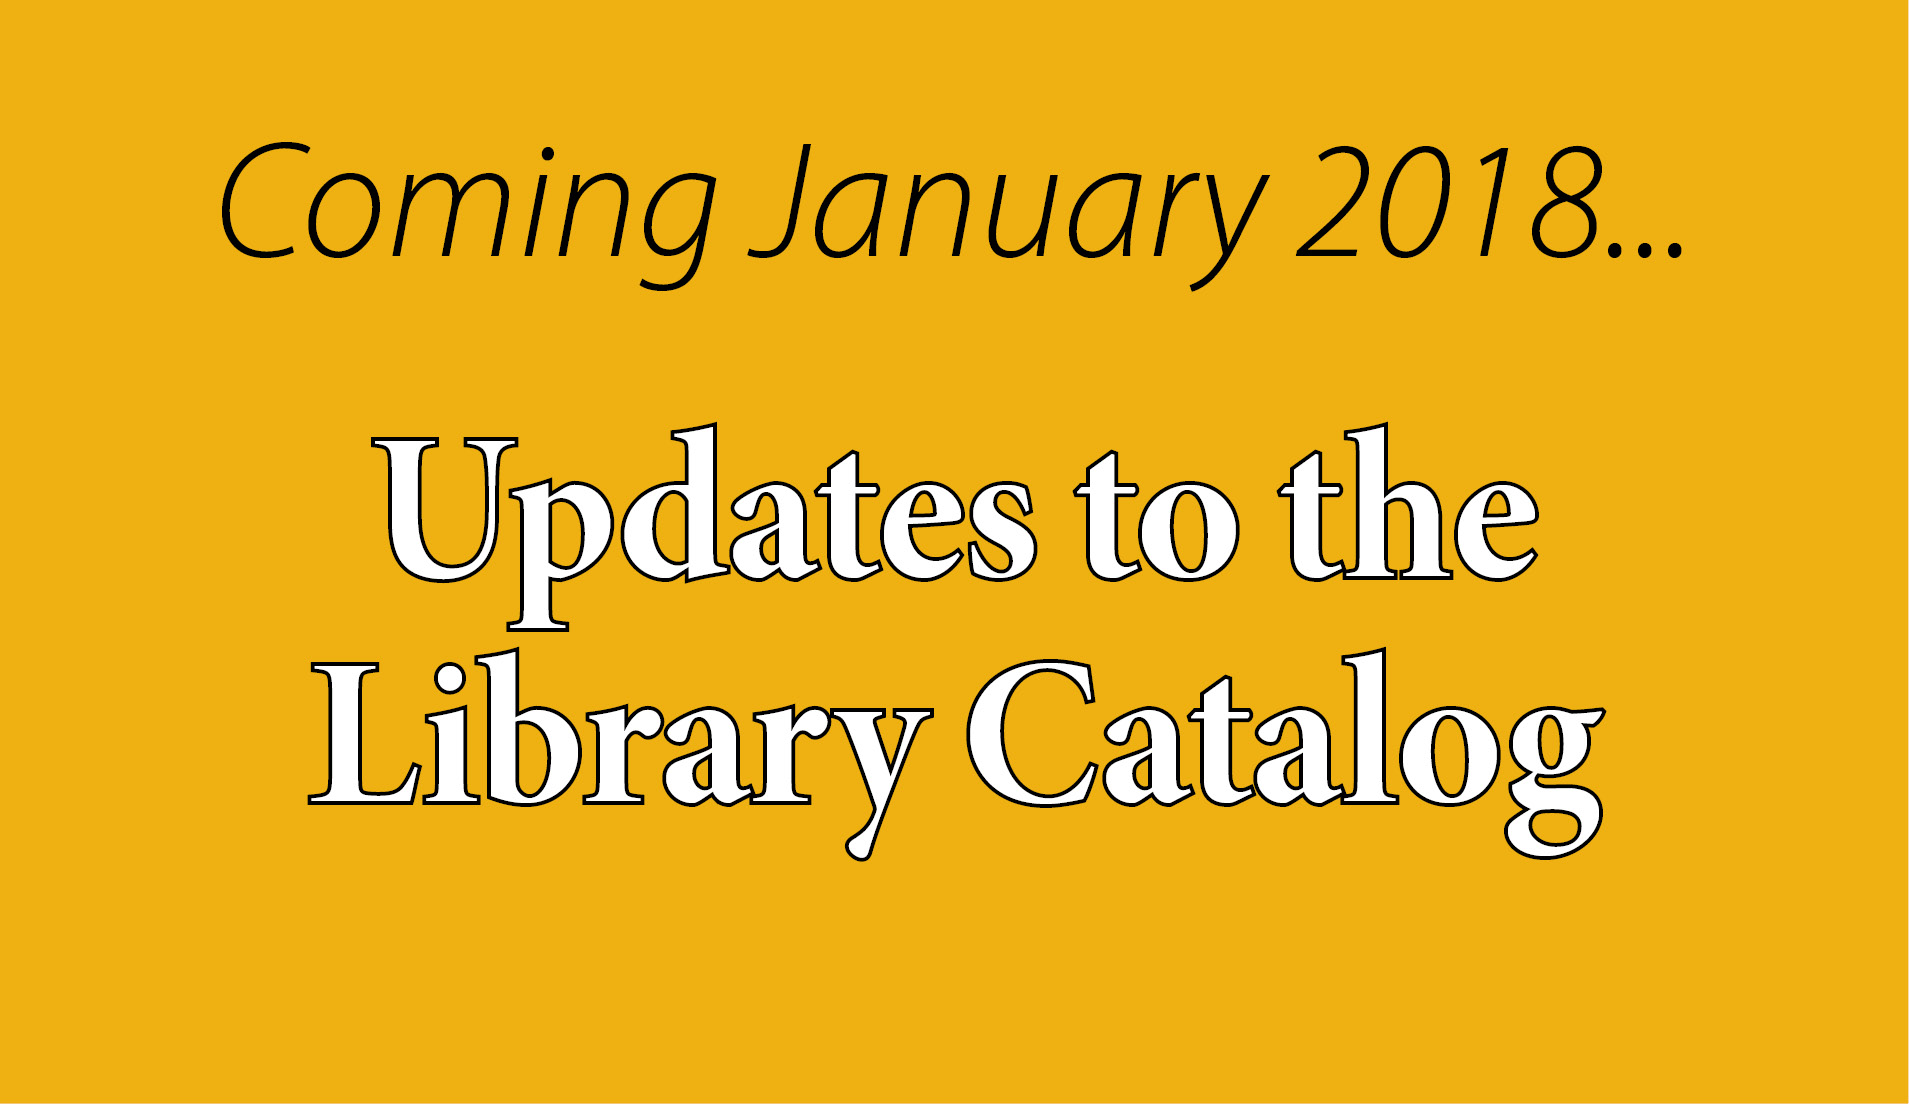 The Library Catalog is Changing